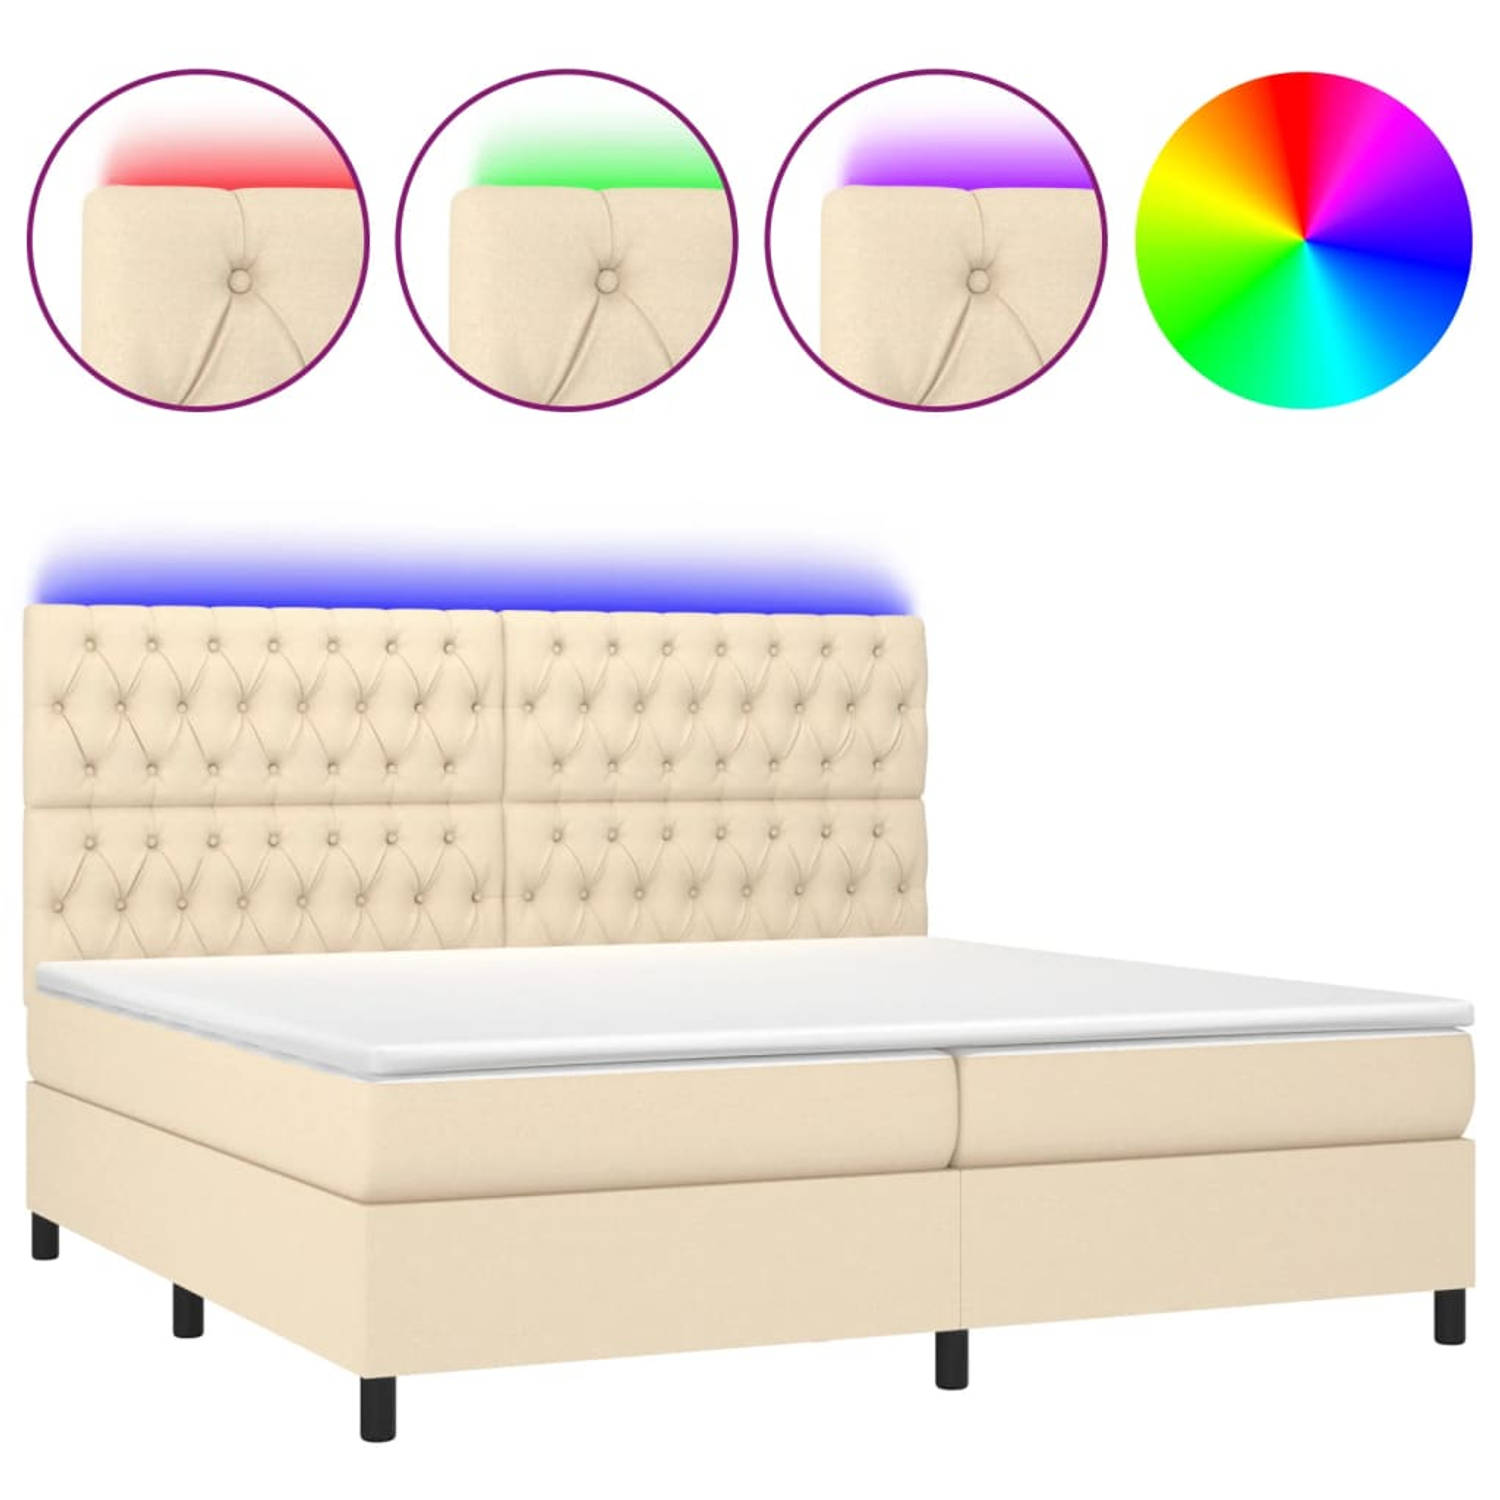 The Living Store Boxspring met matras en LED stof crèmekleurig 200x200 cm - Boxspring - Boxsprings - Bed - Slaapmeubel - Boxspringbed - Boxspring Bed - Tweepersoonsbed - Bed Met Ma